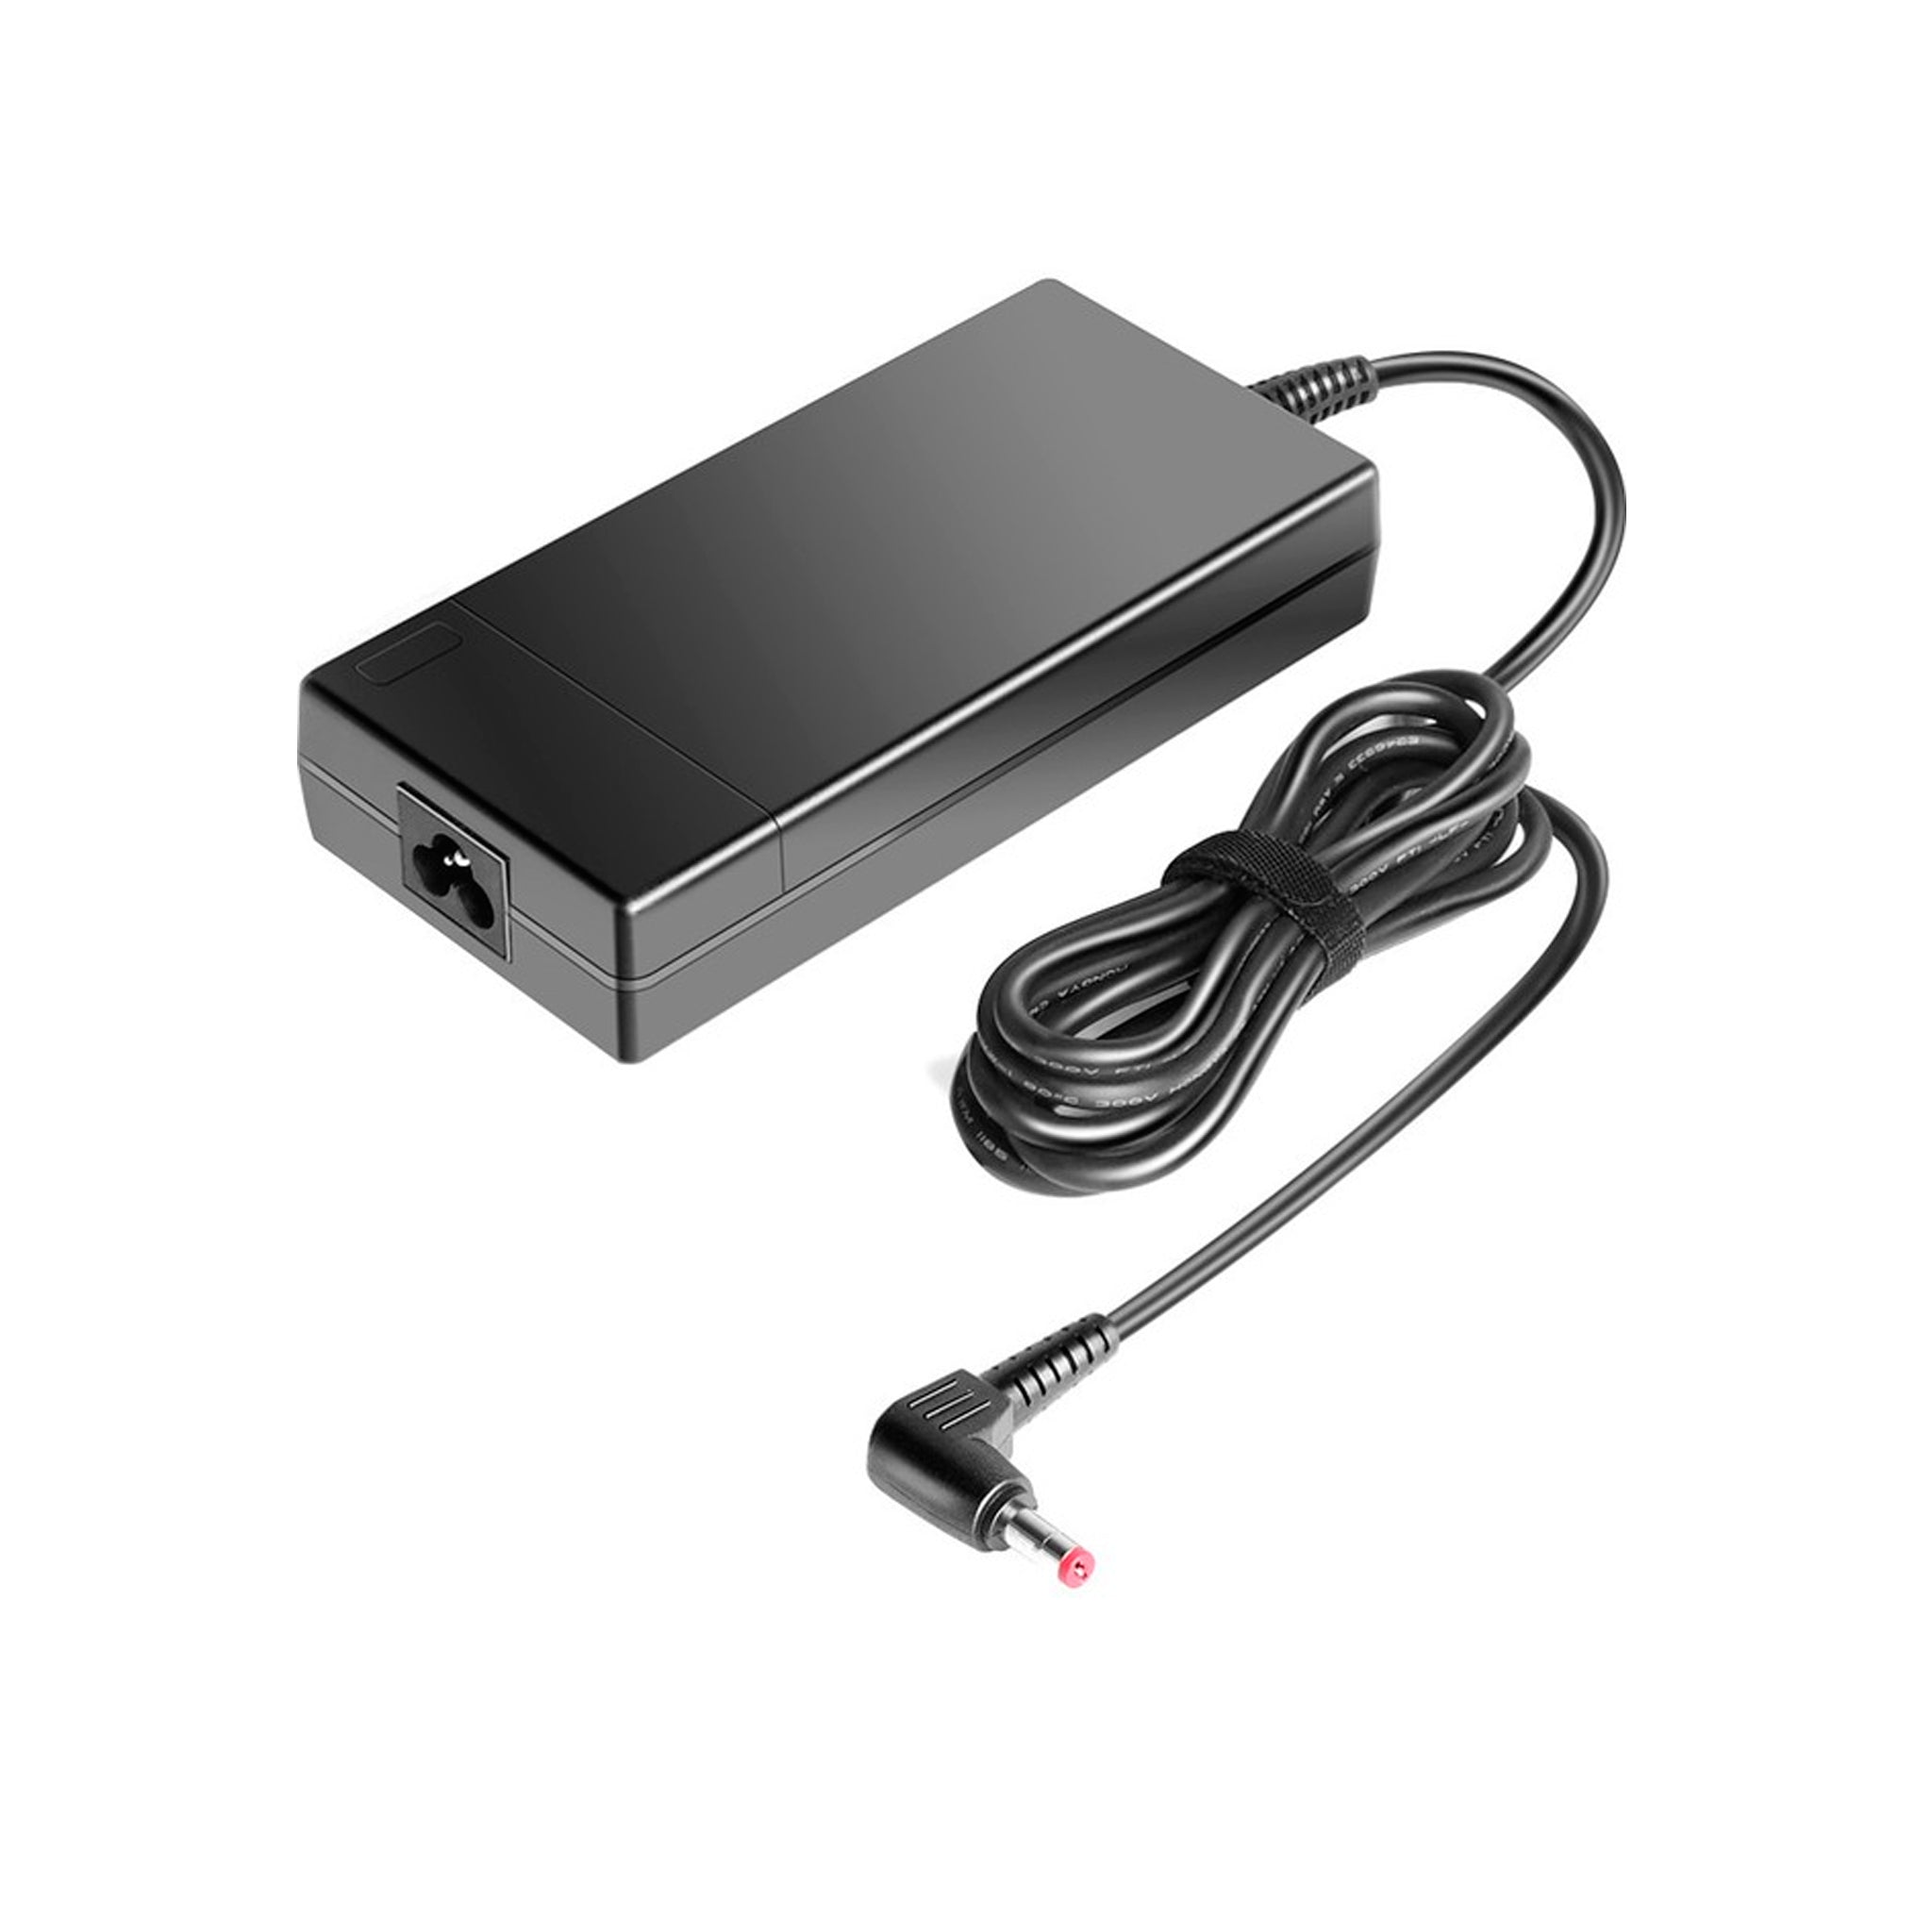 Bti - Ac Power Adapter 180w For Most Acer Laptops - Black